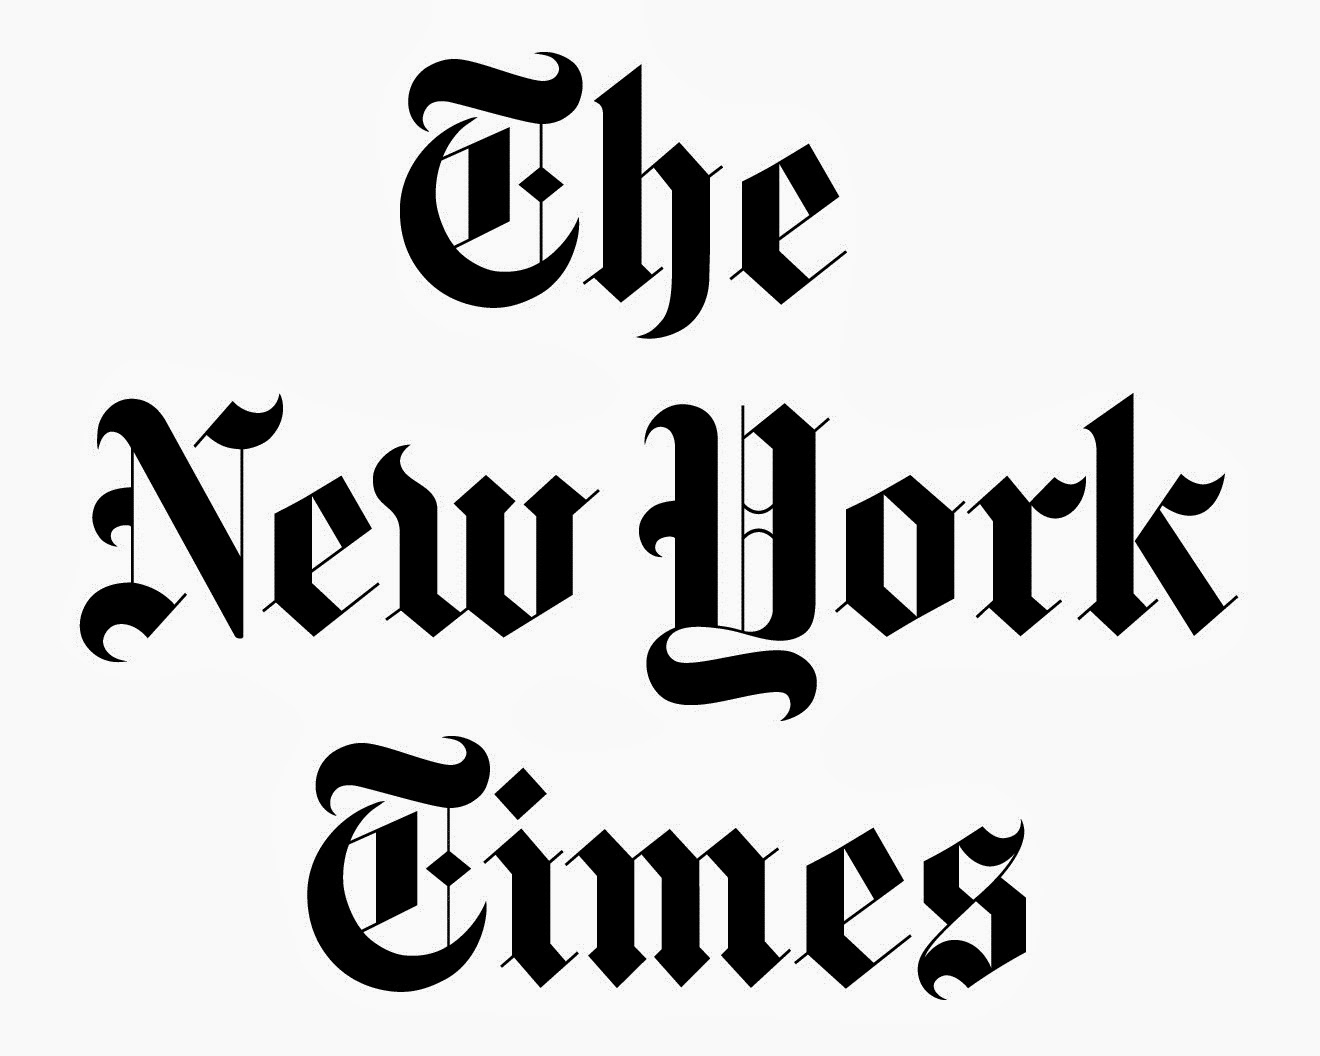 July 17, 2011: The New York Times Introduces 'Confidential' to the World: GROUND BREAKING.